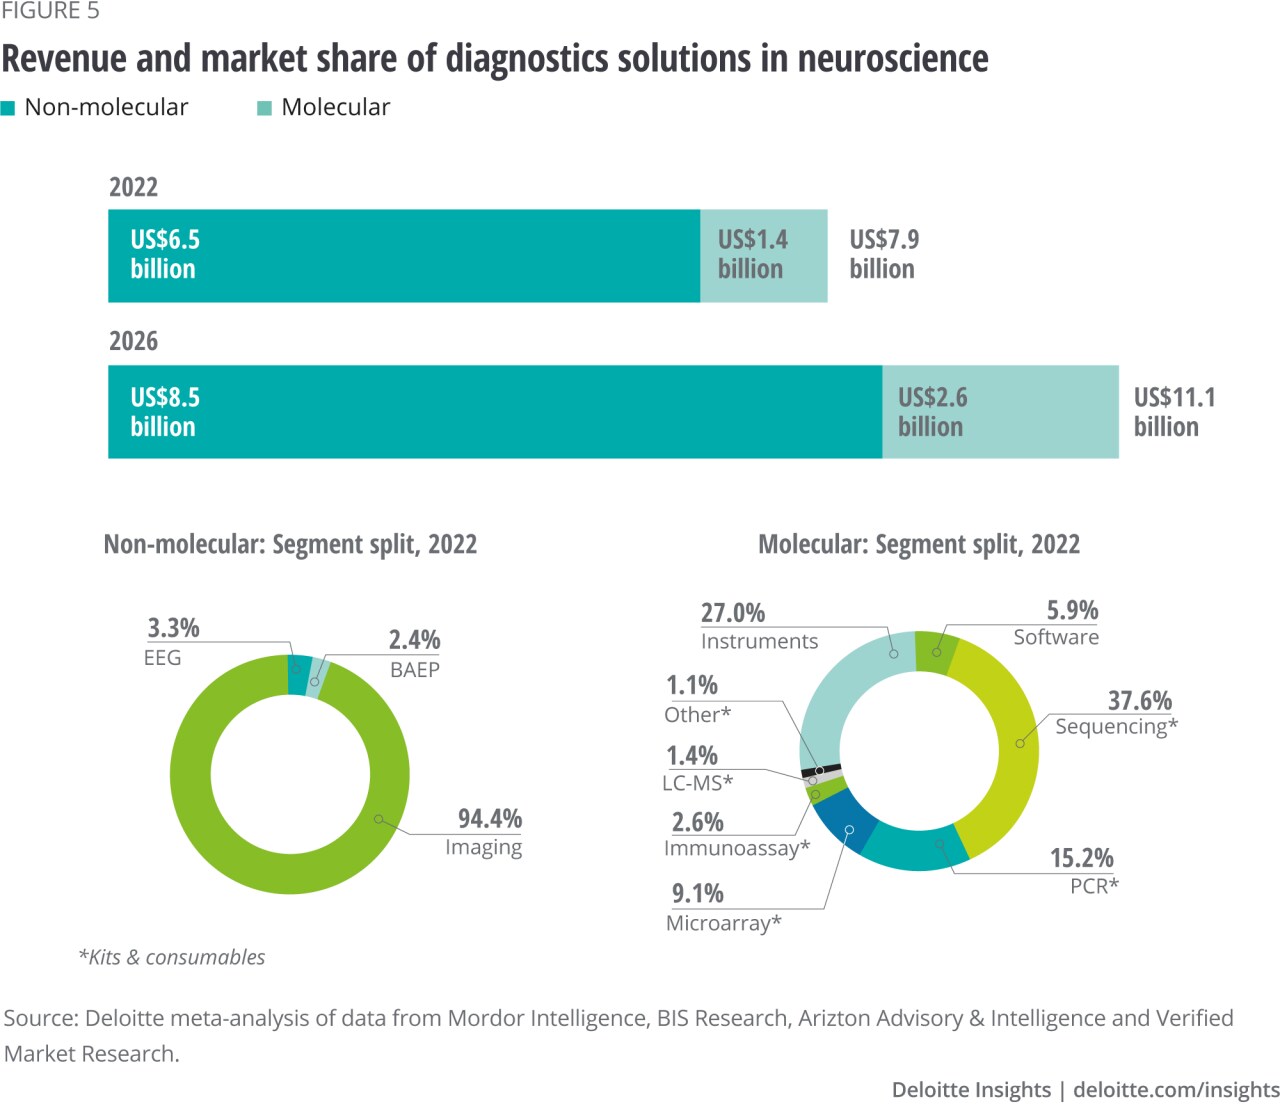 Figure 5. Revenue and market share of diagnostics solutions in neuroscience